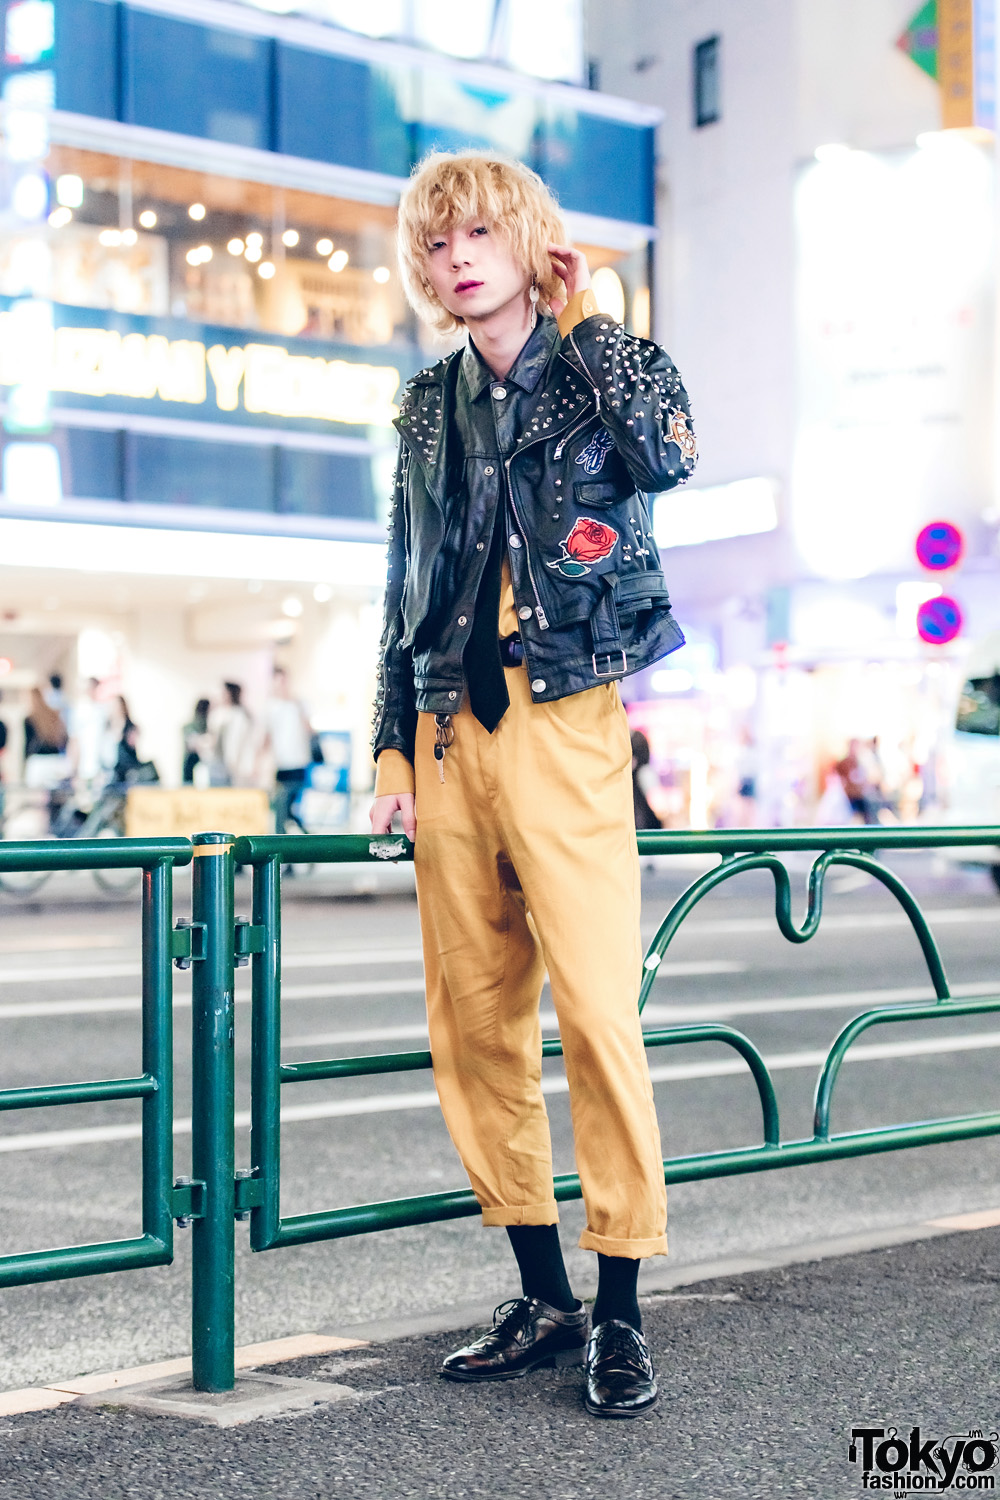 Harajuku Guy in Edgy Streetwear w/ Studded Leather Jacket and Black Leather Lace-Up Shoes